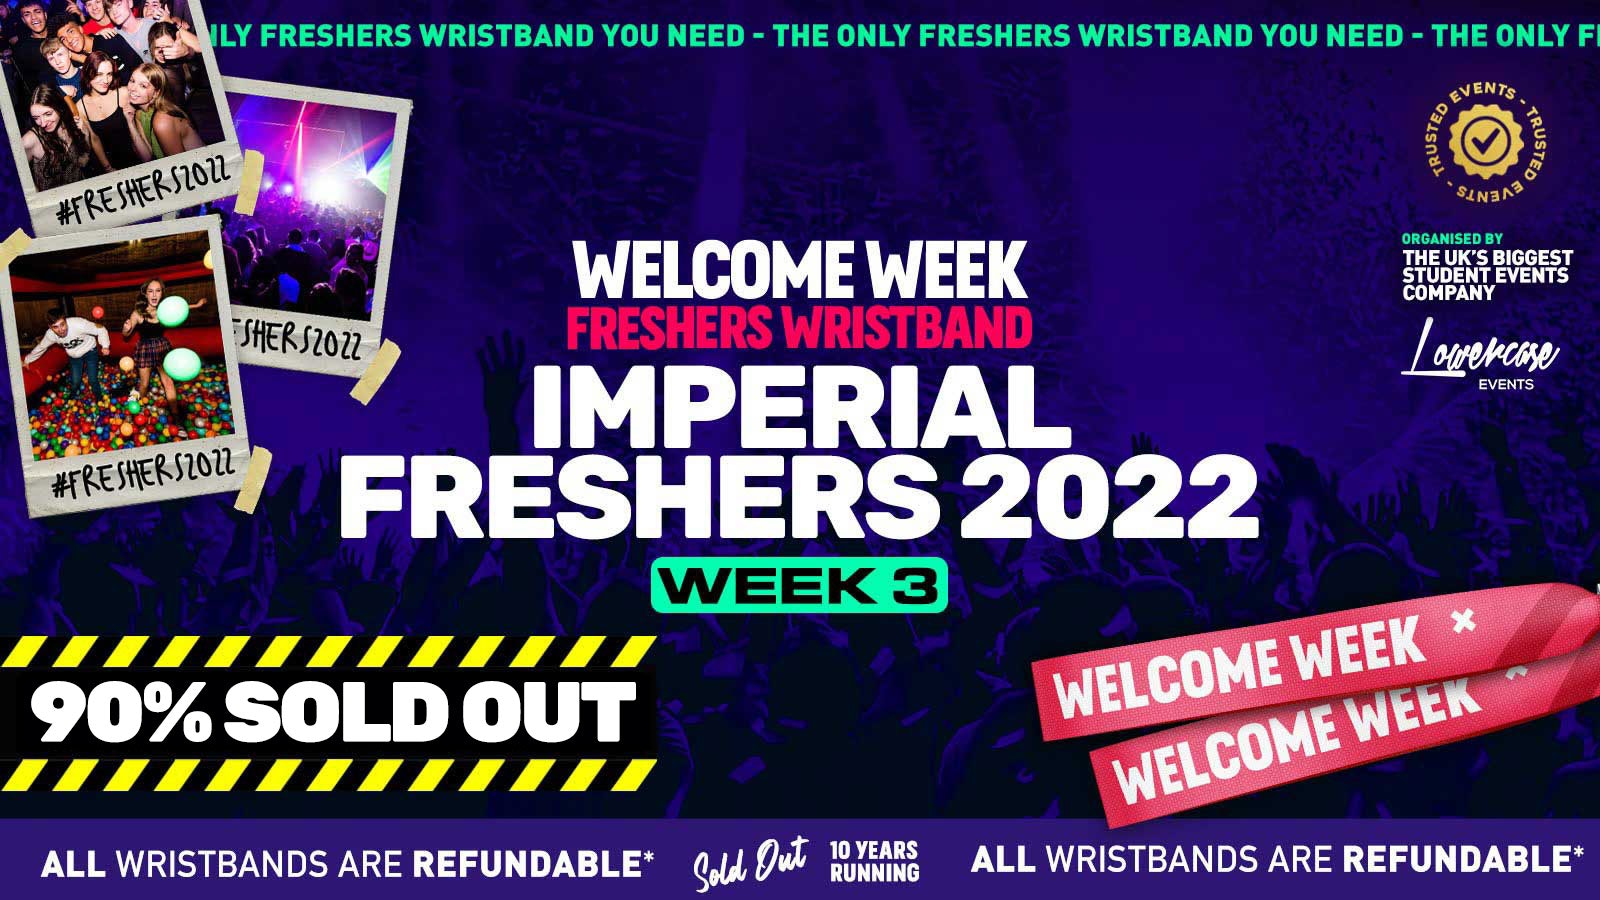 Imperial Freshers 2022 – London Freshers Week 2022 – [Welcome Week] – 90% SOLD OUT ⚠️